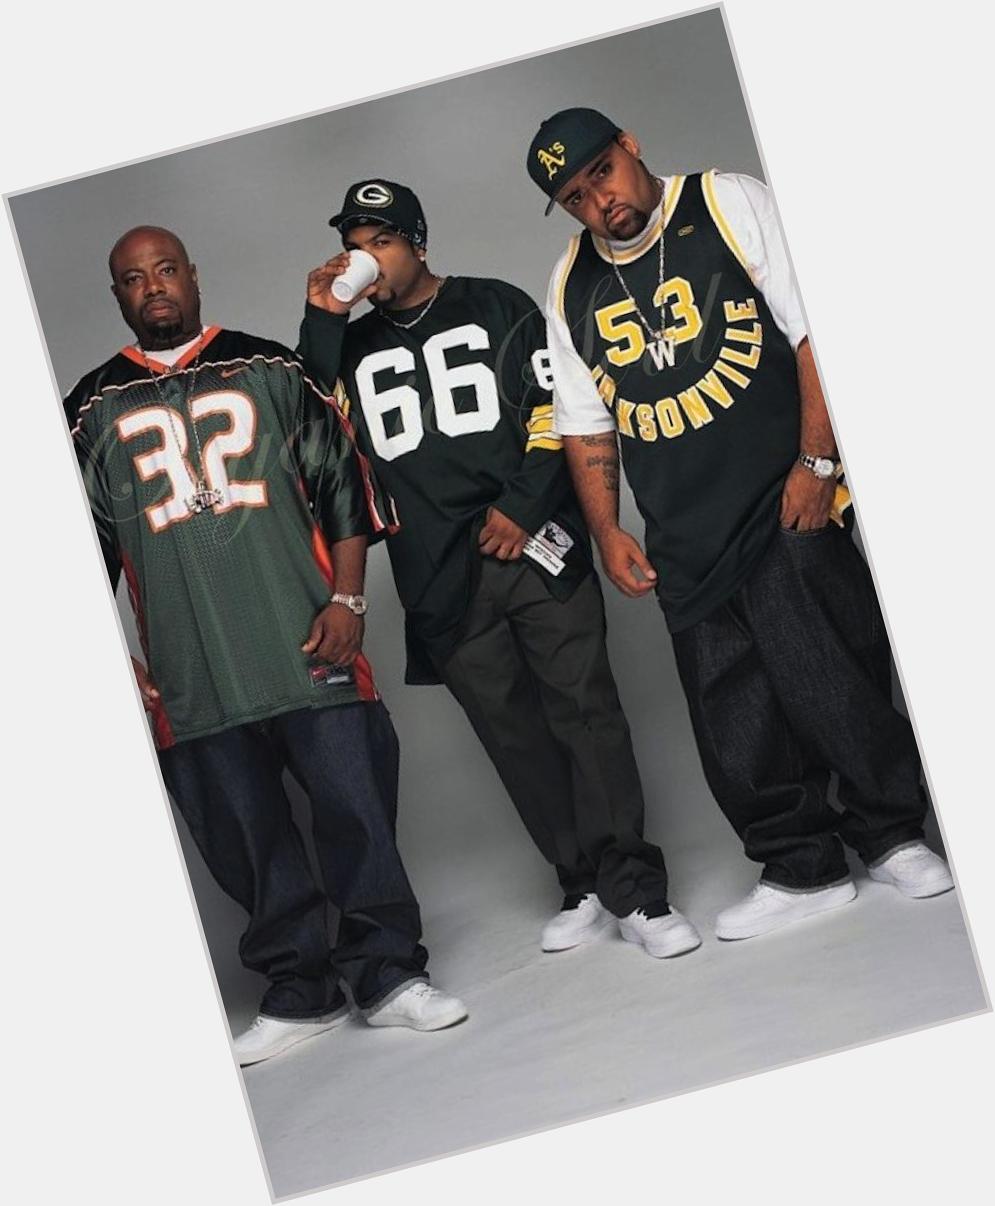 Happy Birthday from Organic Soul Rapper Mack 10 is 44. (pic: on right) 
 